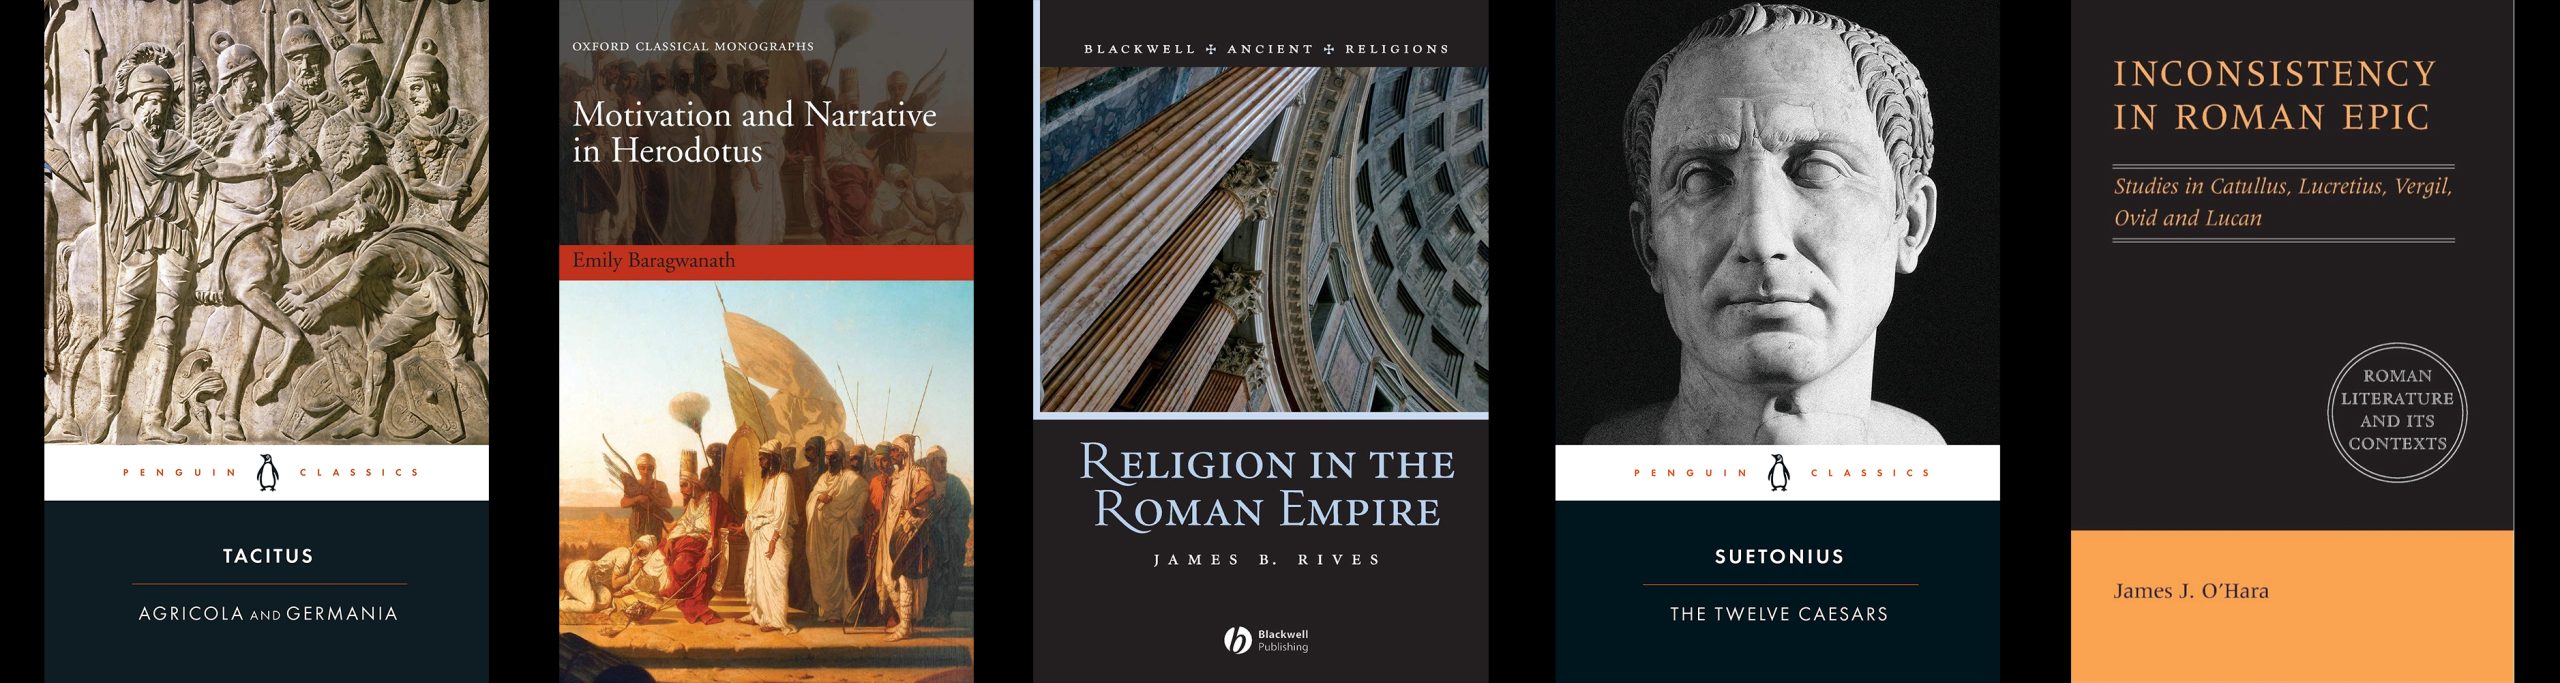 1. Tacitus: Agricola and Germania. 2. Motivation and Narrative in Herodotus by Emily Baragwanath. 3. Religion in the Roman Empire by James B. Rives. 4. Suetonius: The Twelve Caesars. 5. Inconsistency in Roman Epic: Studies in Catullus, Lucretius, Vergil, Ovid and Lucan by James J. O'Hara.